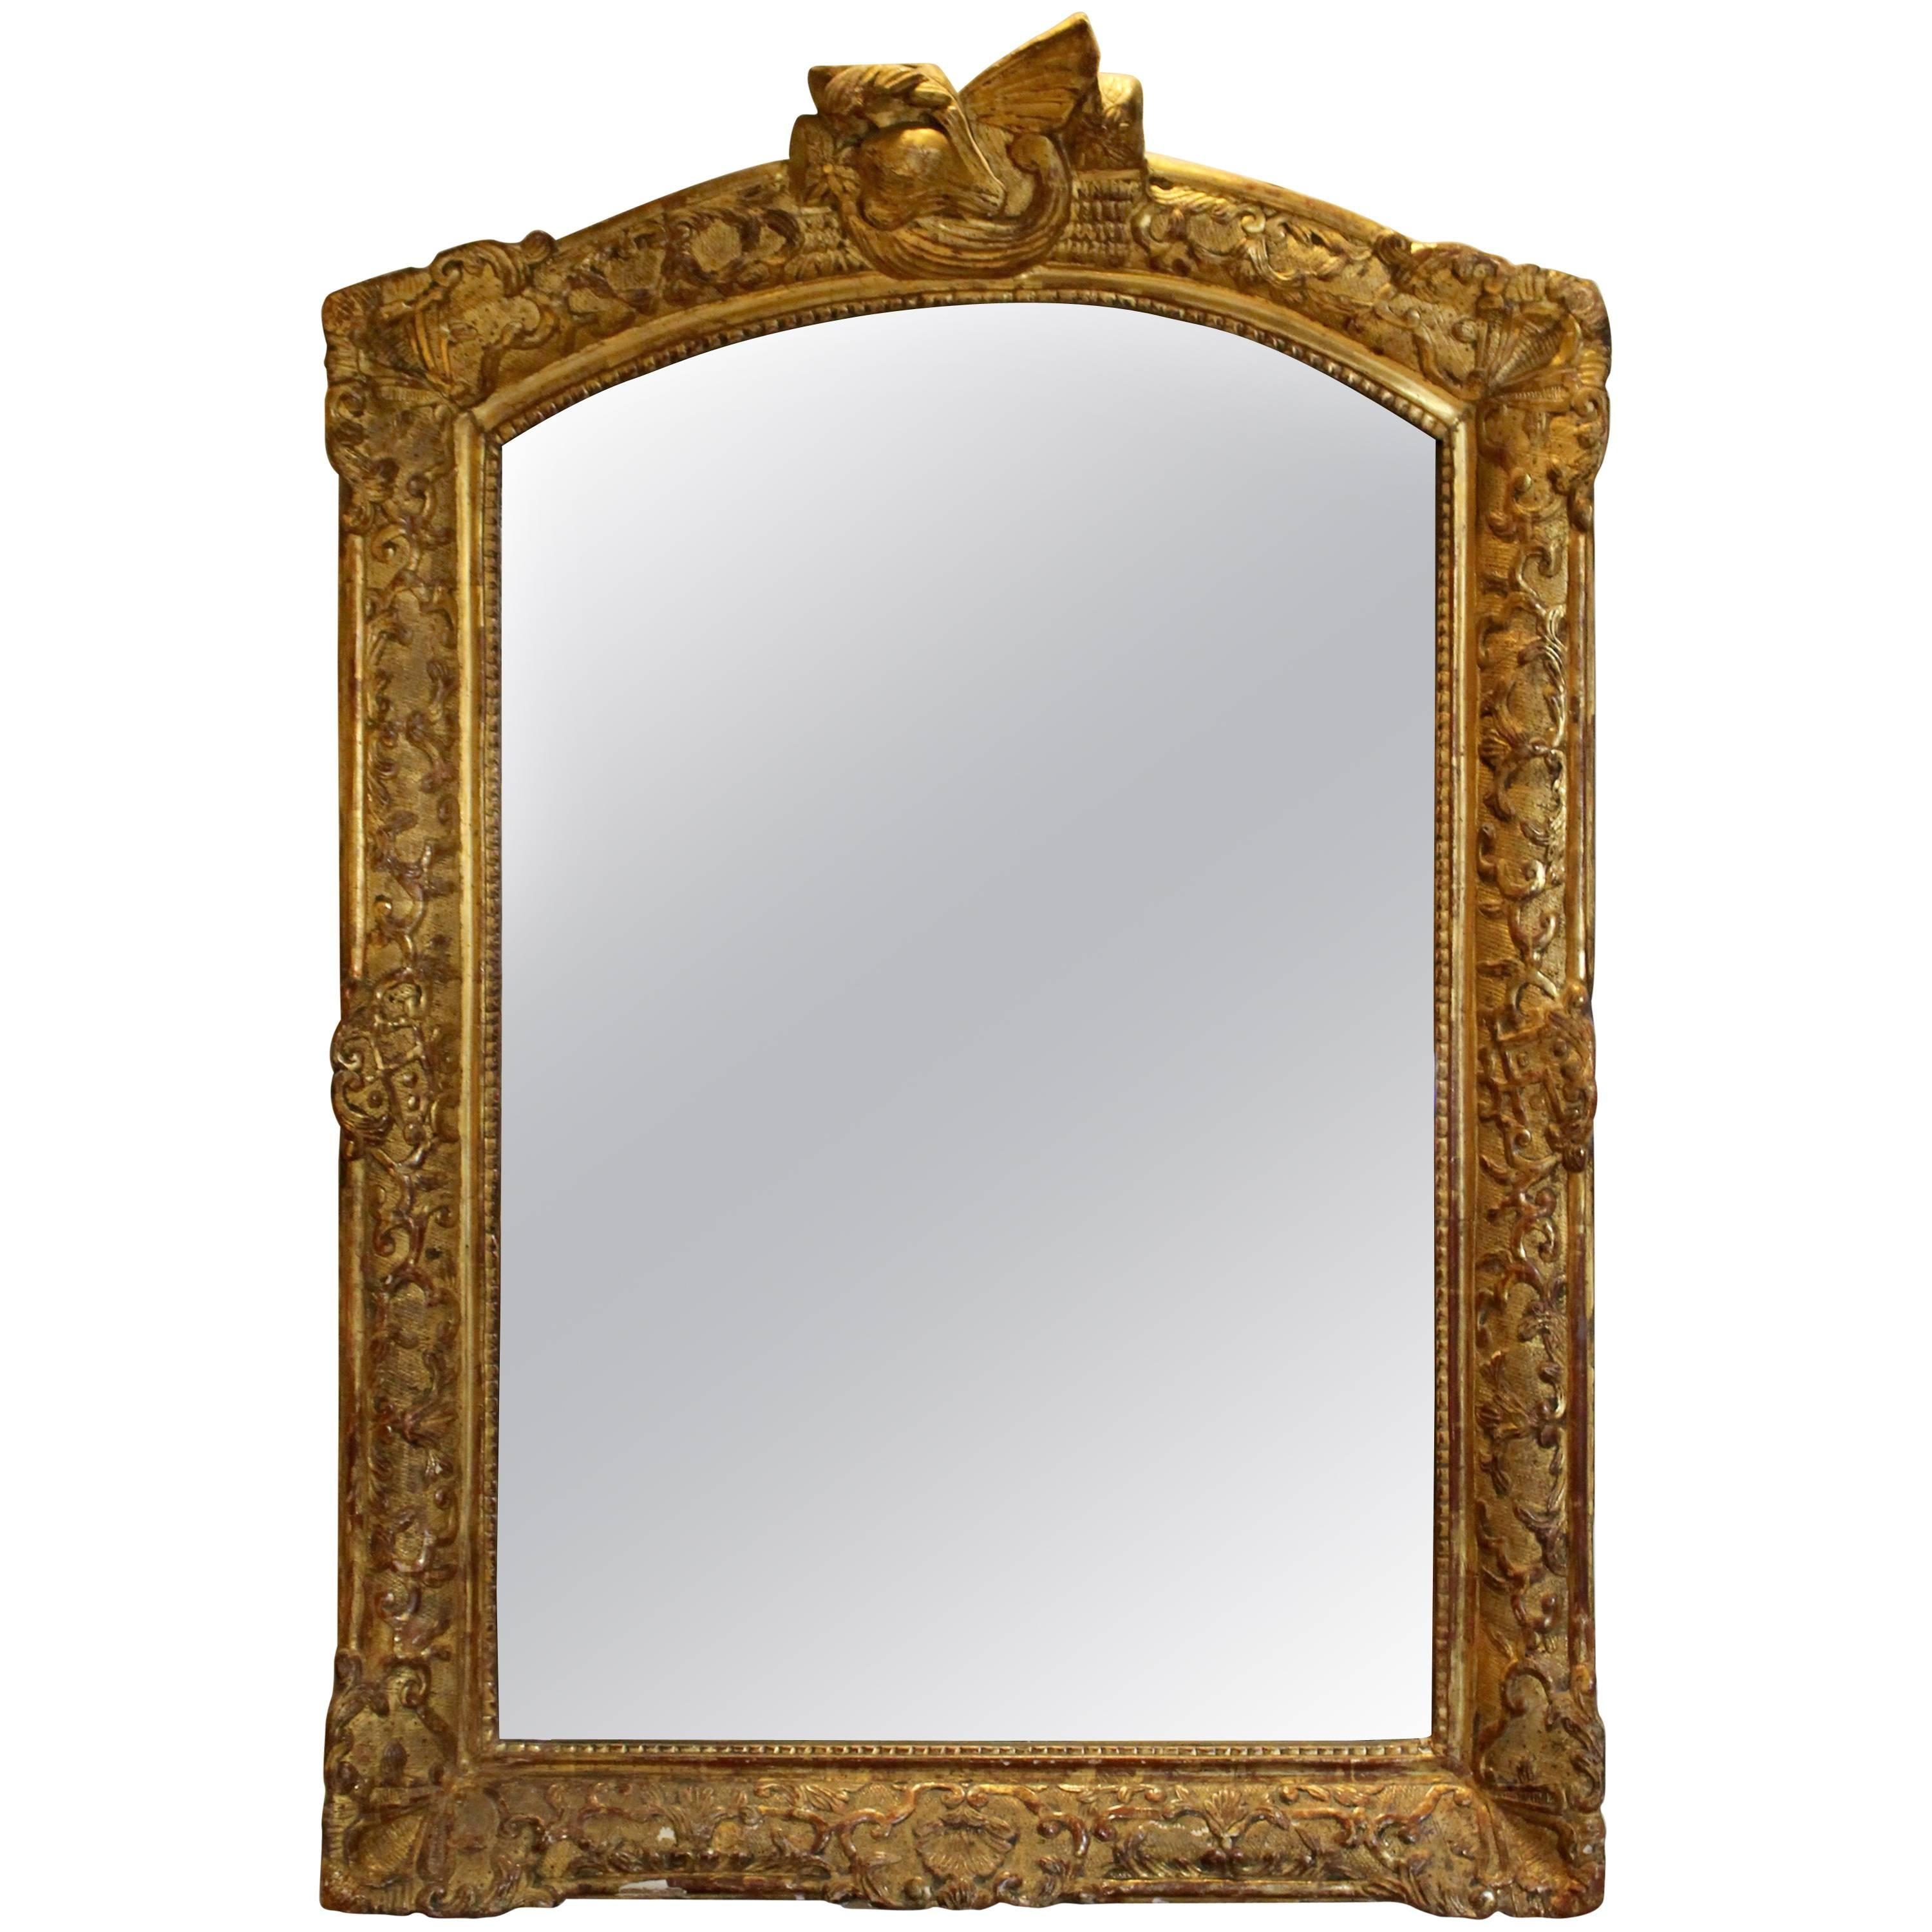 18th Century French Régence Period Giltwood Carved Mirror in the Baroque Style For Sale